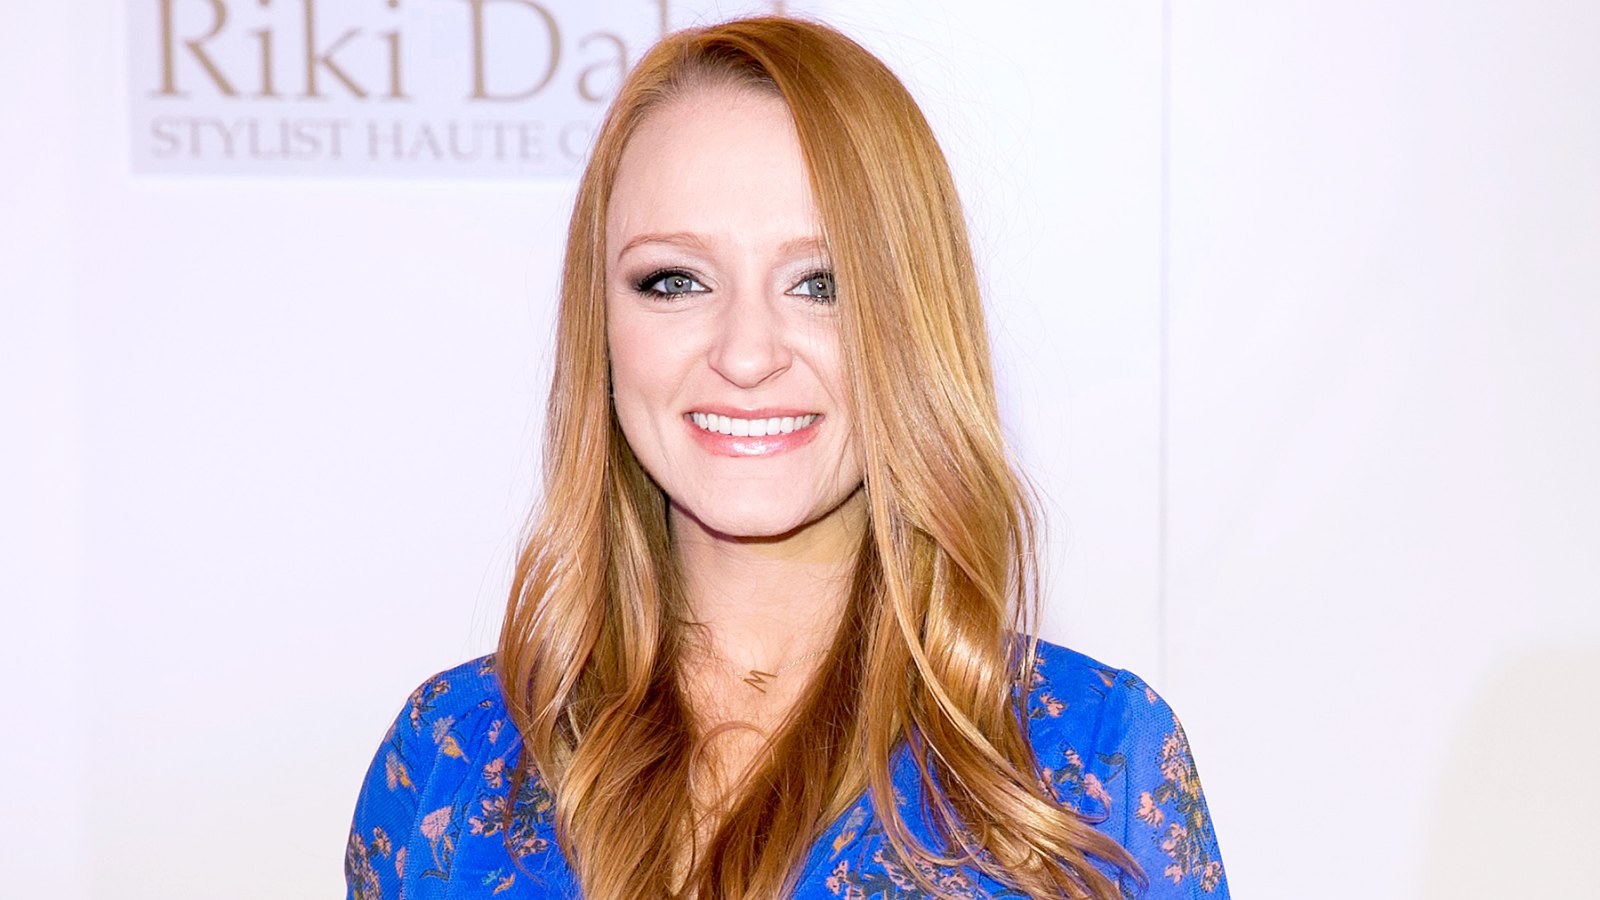 Maci Bookout attends the Bridal Fashion Show at The Grosvenor House Hotel on March 6, 2016 in London, England.